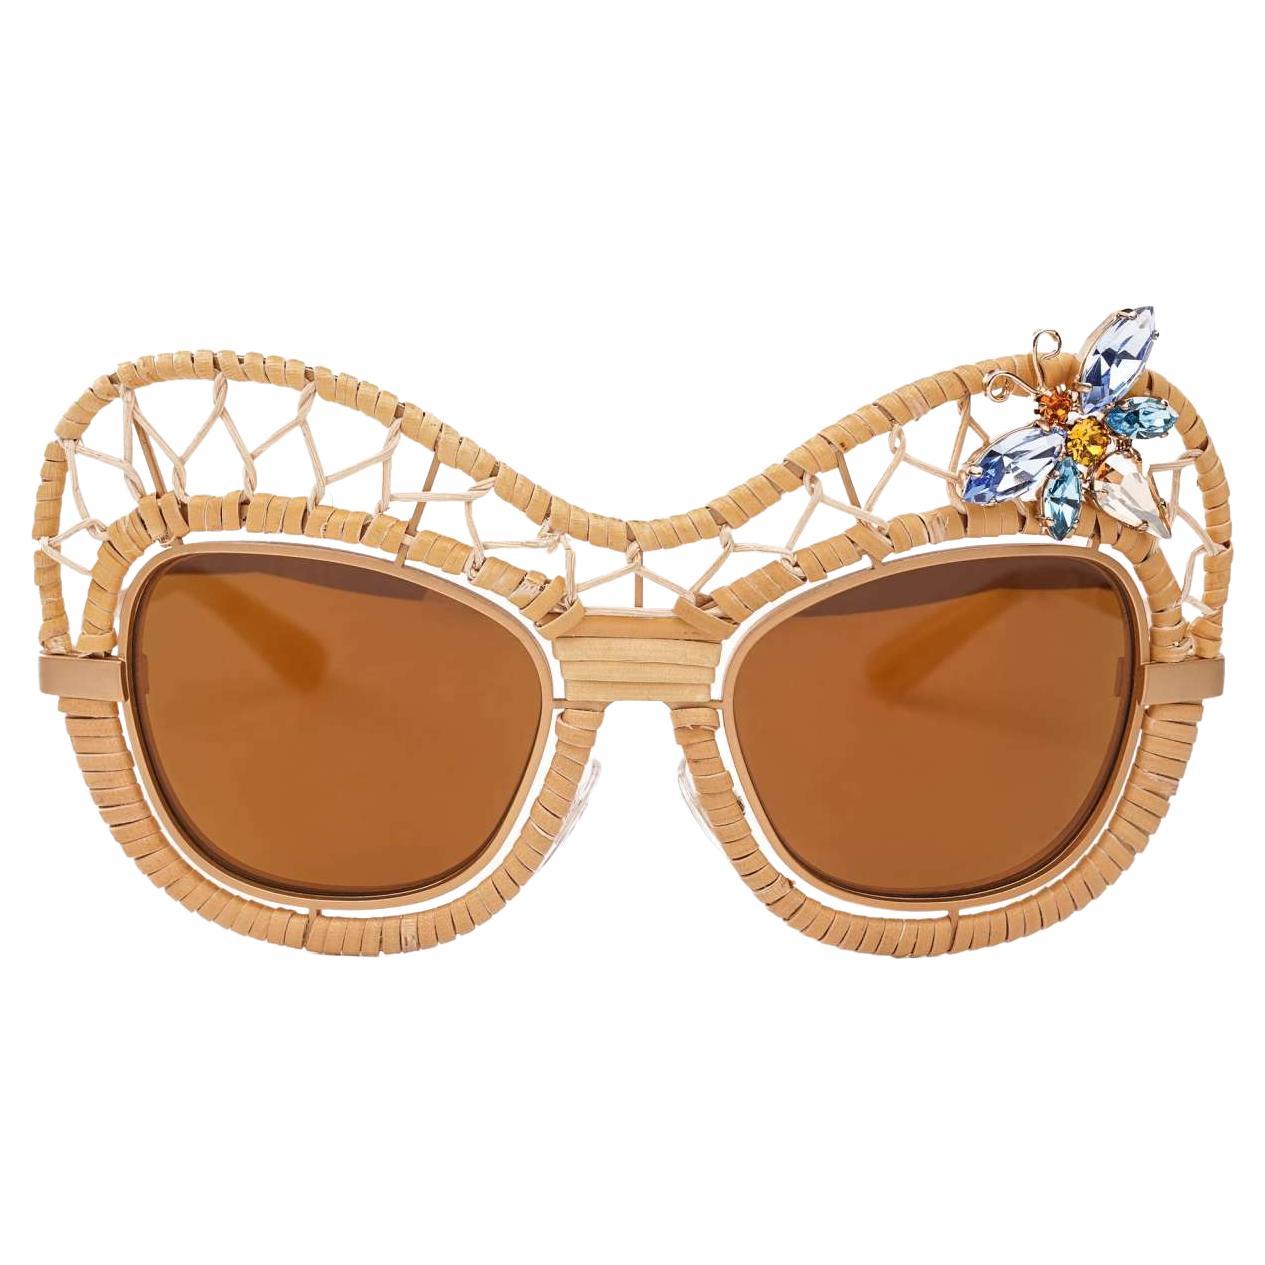 D&G-Special Edition Straw Butterfly Sunglasses DG2159-B with Crystals Beige Gold For Sale